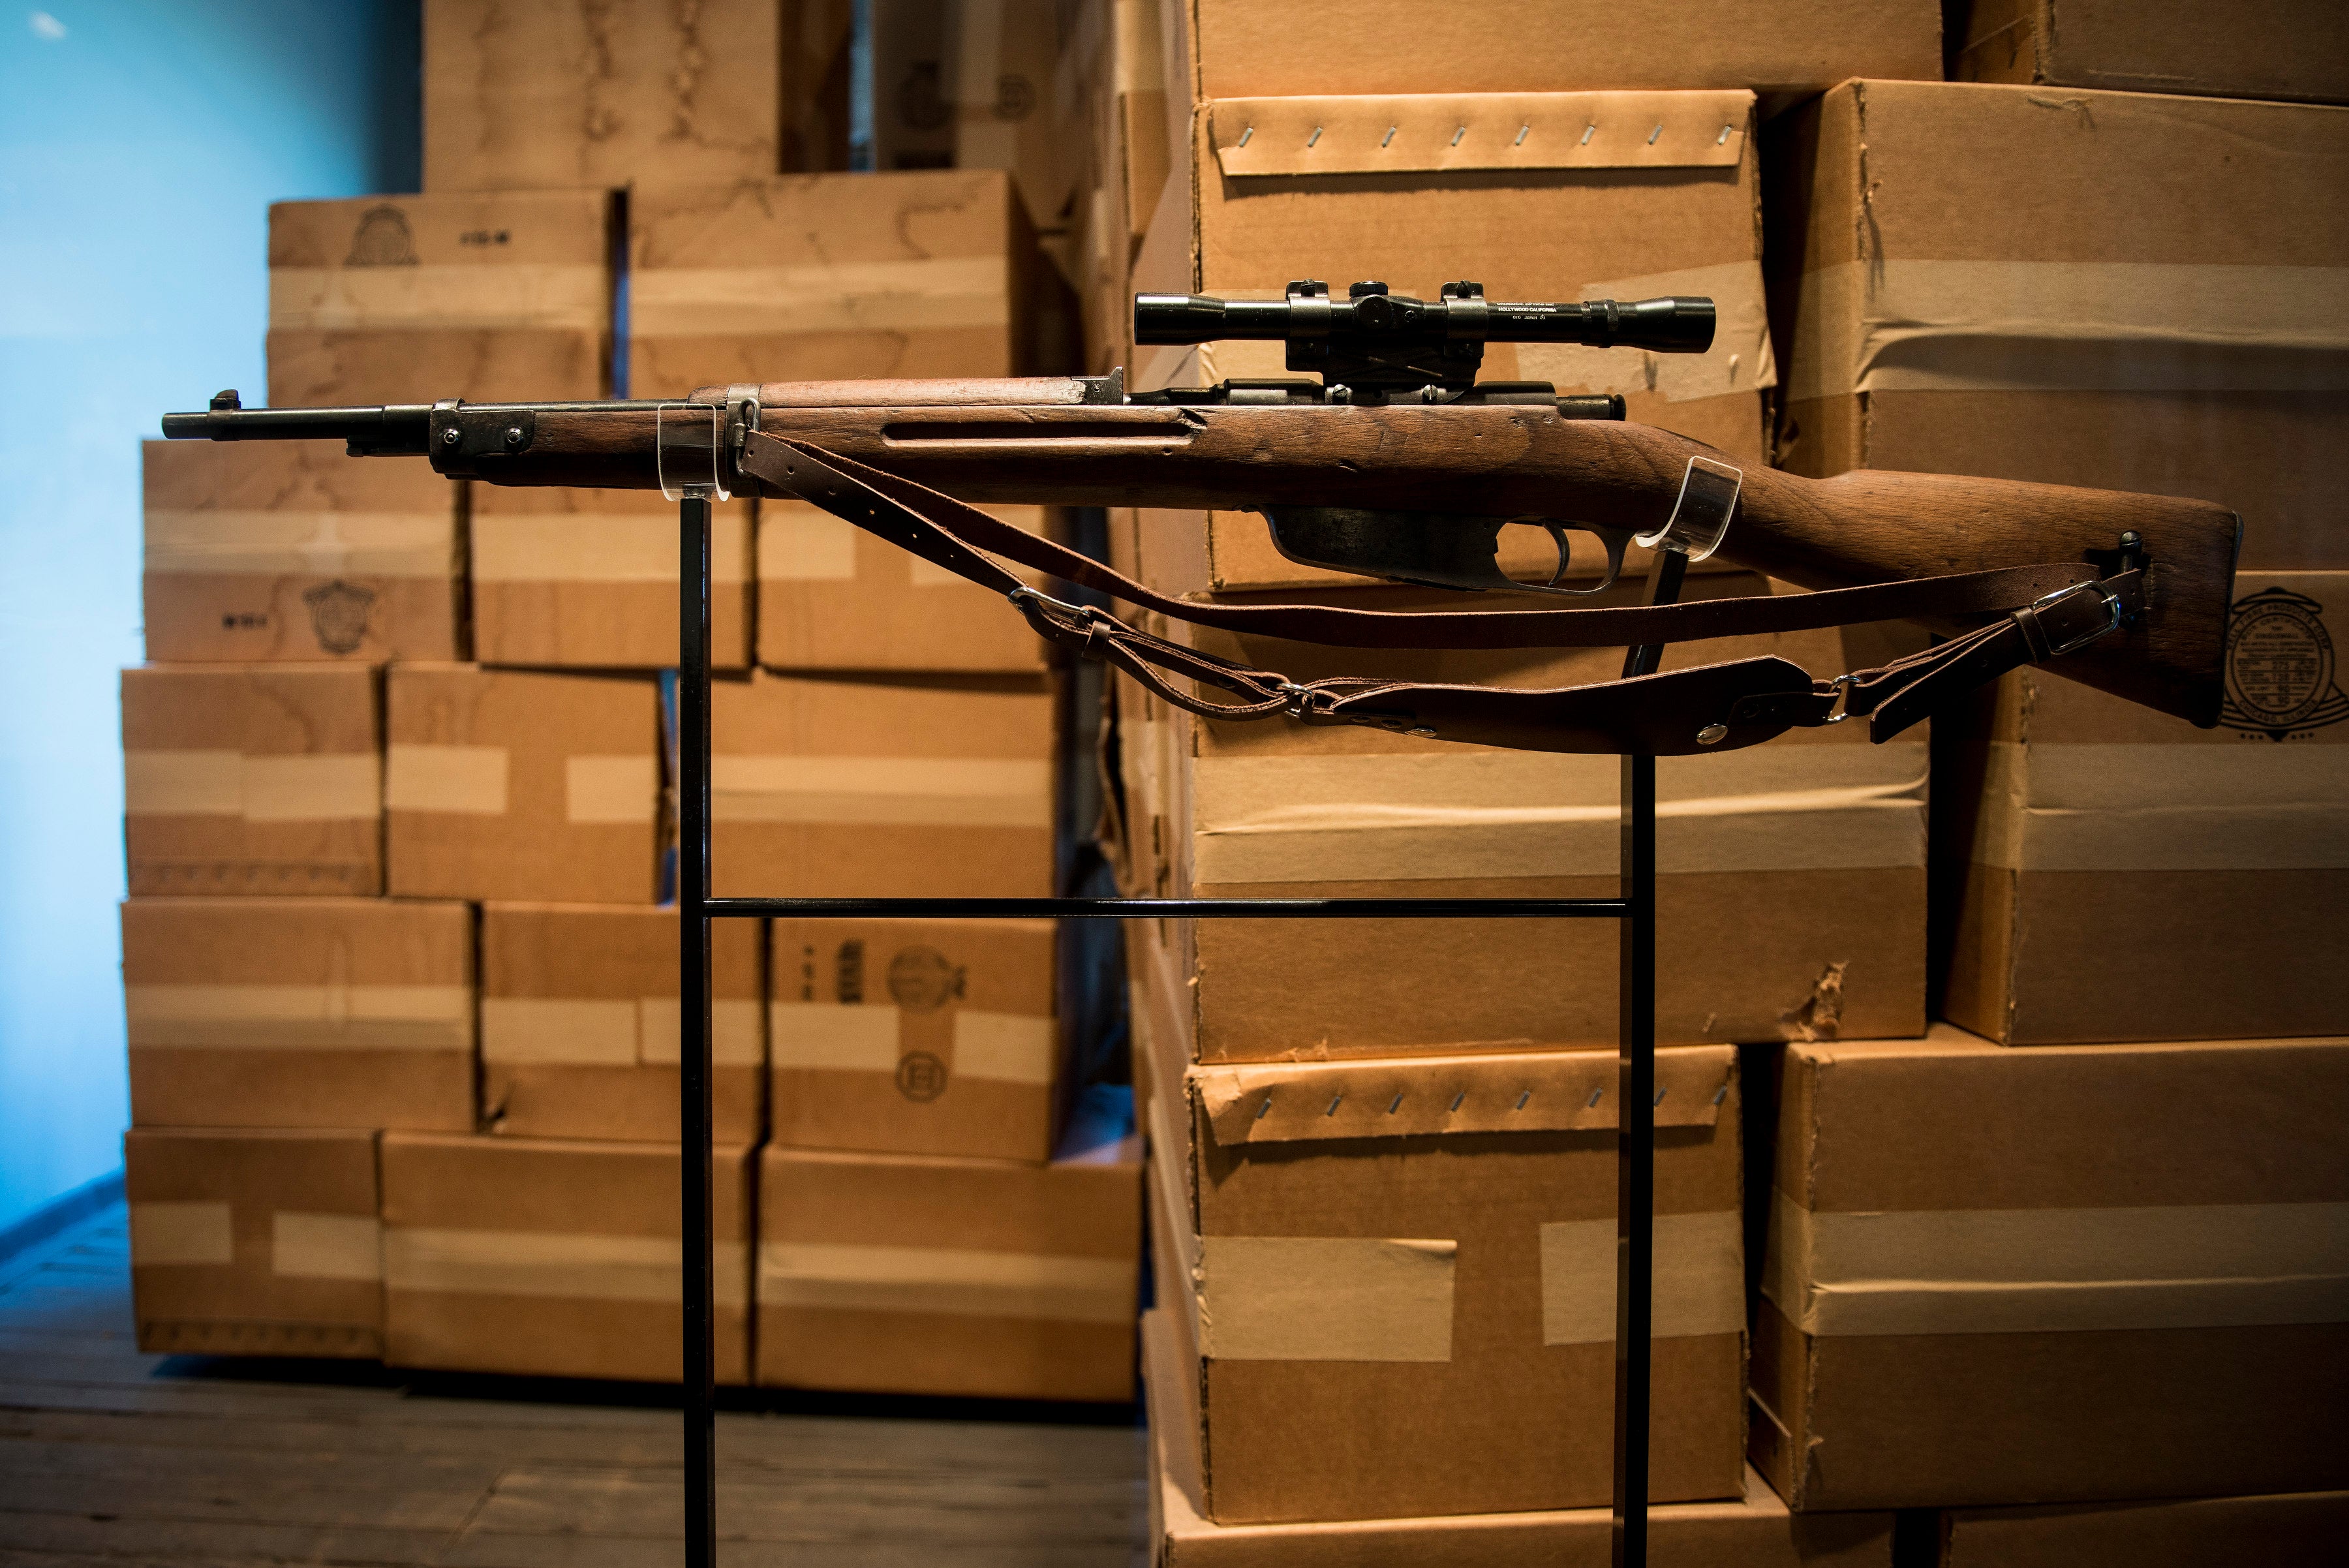 A Carcano Model 91/38 rifle is seen near where Oswald ditched his 50 years earlier, at the Sixth Floor Museum, formerly the site of the Texas School Book Depository